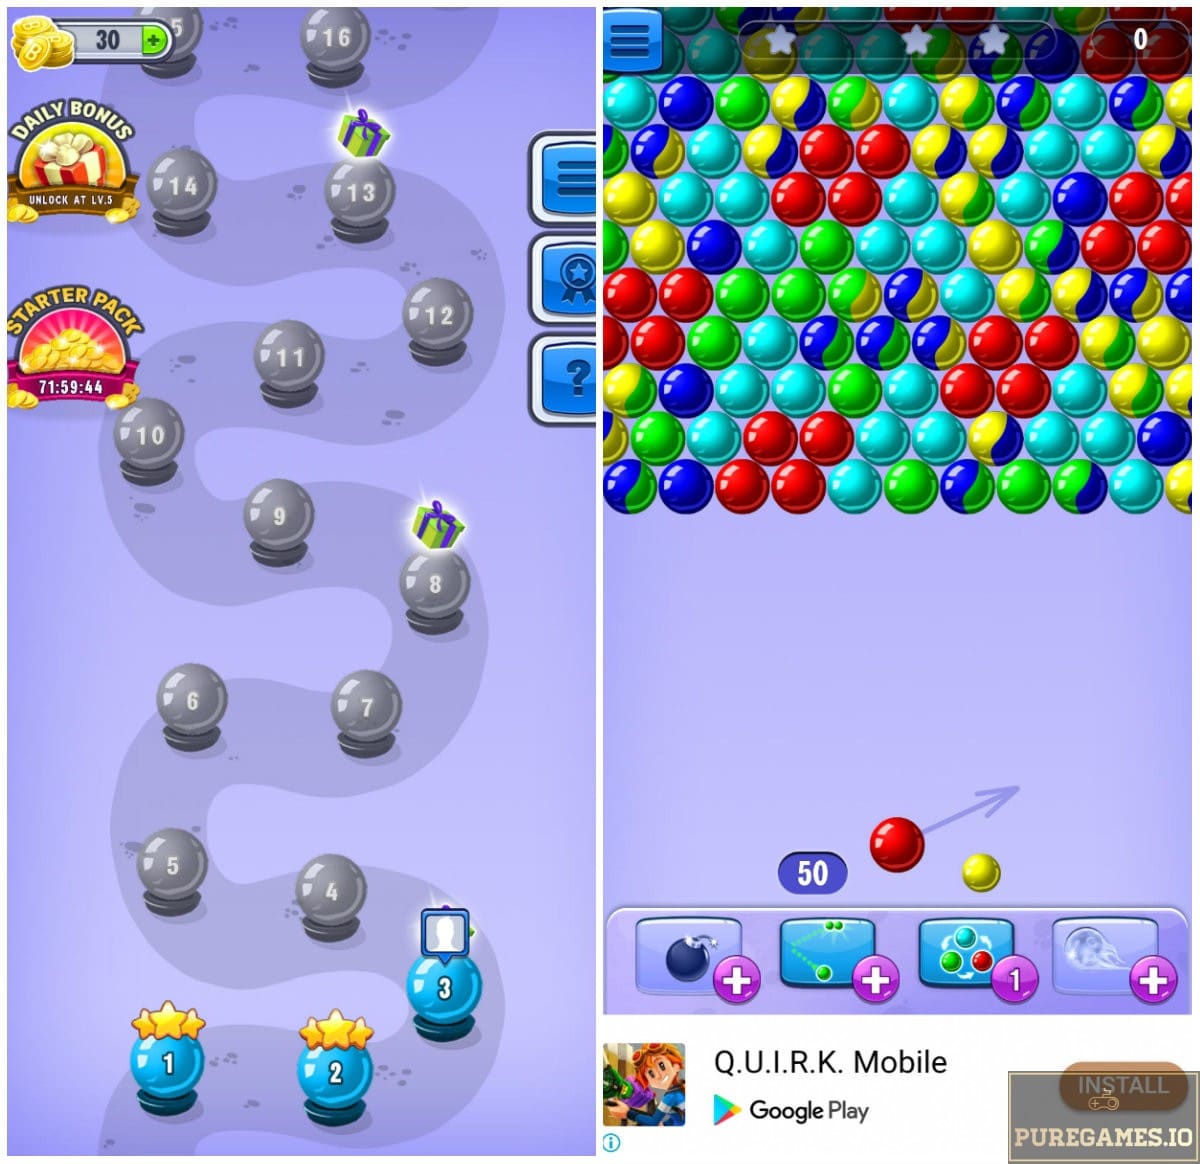 bubble shooter download free full version